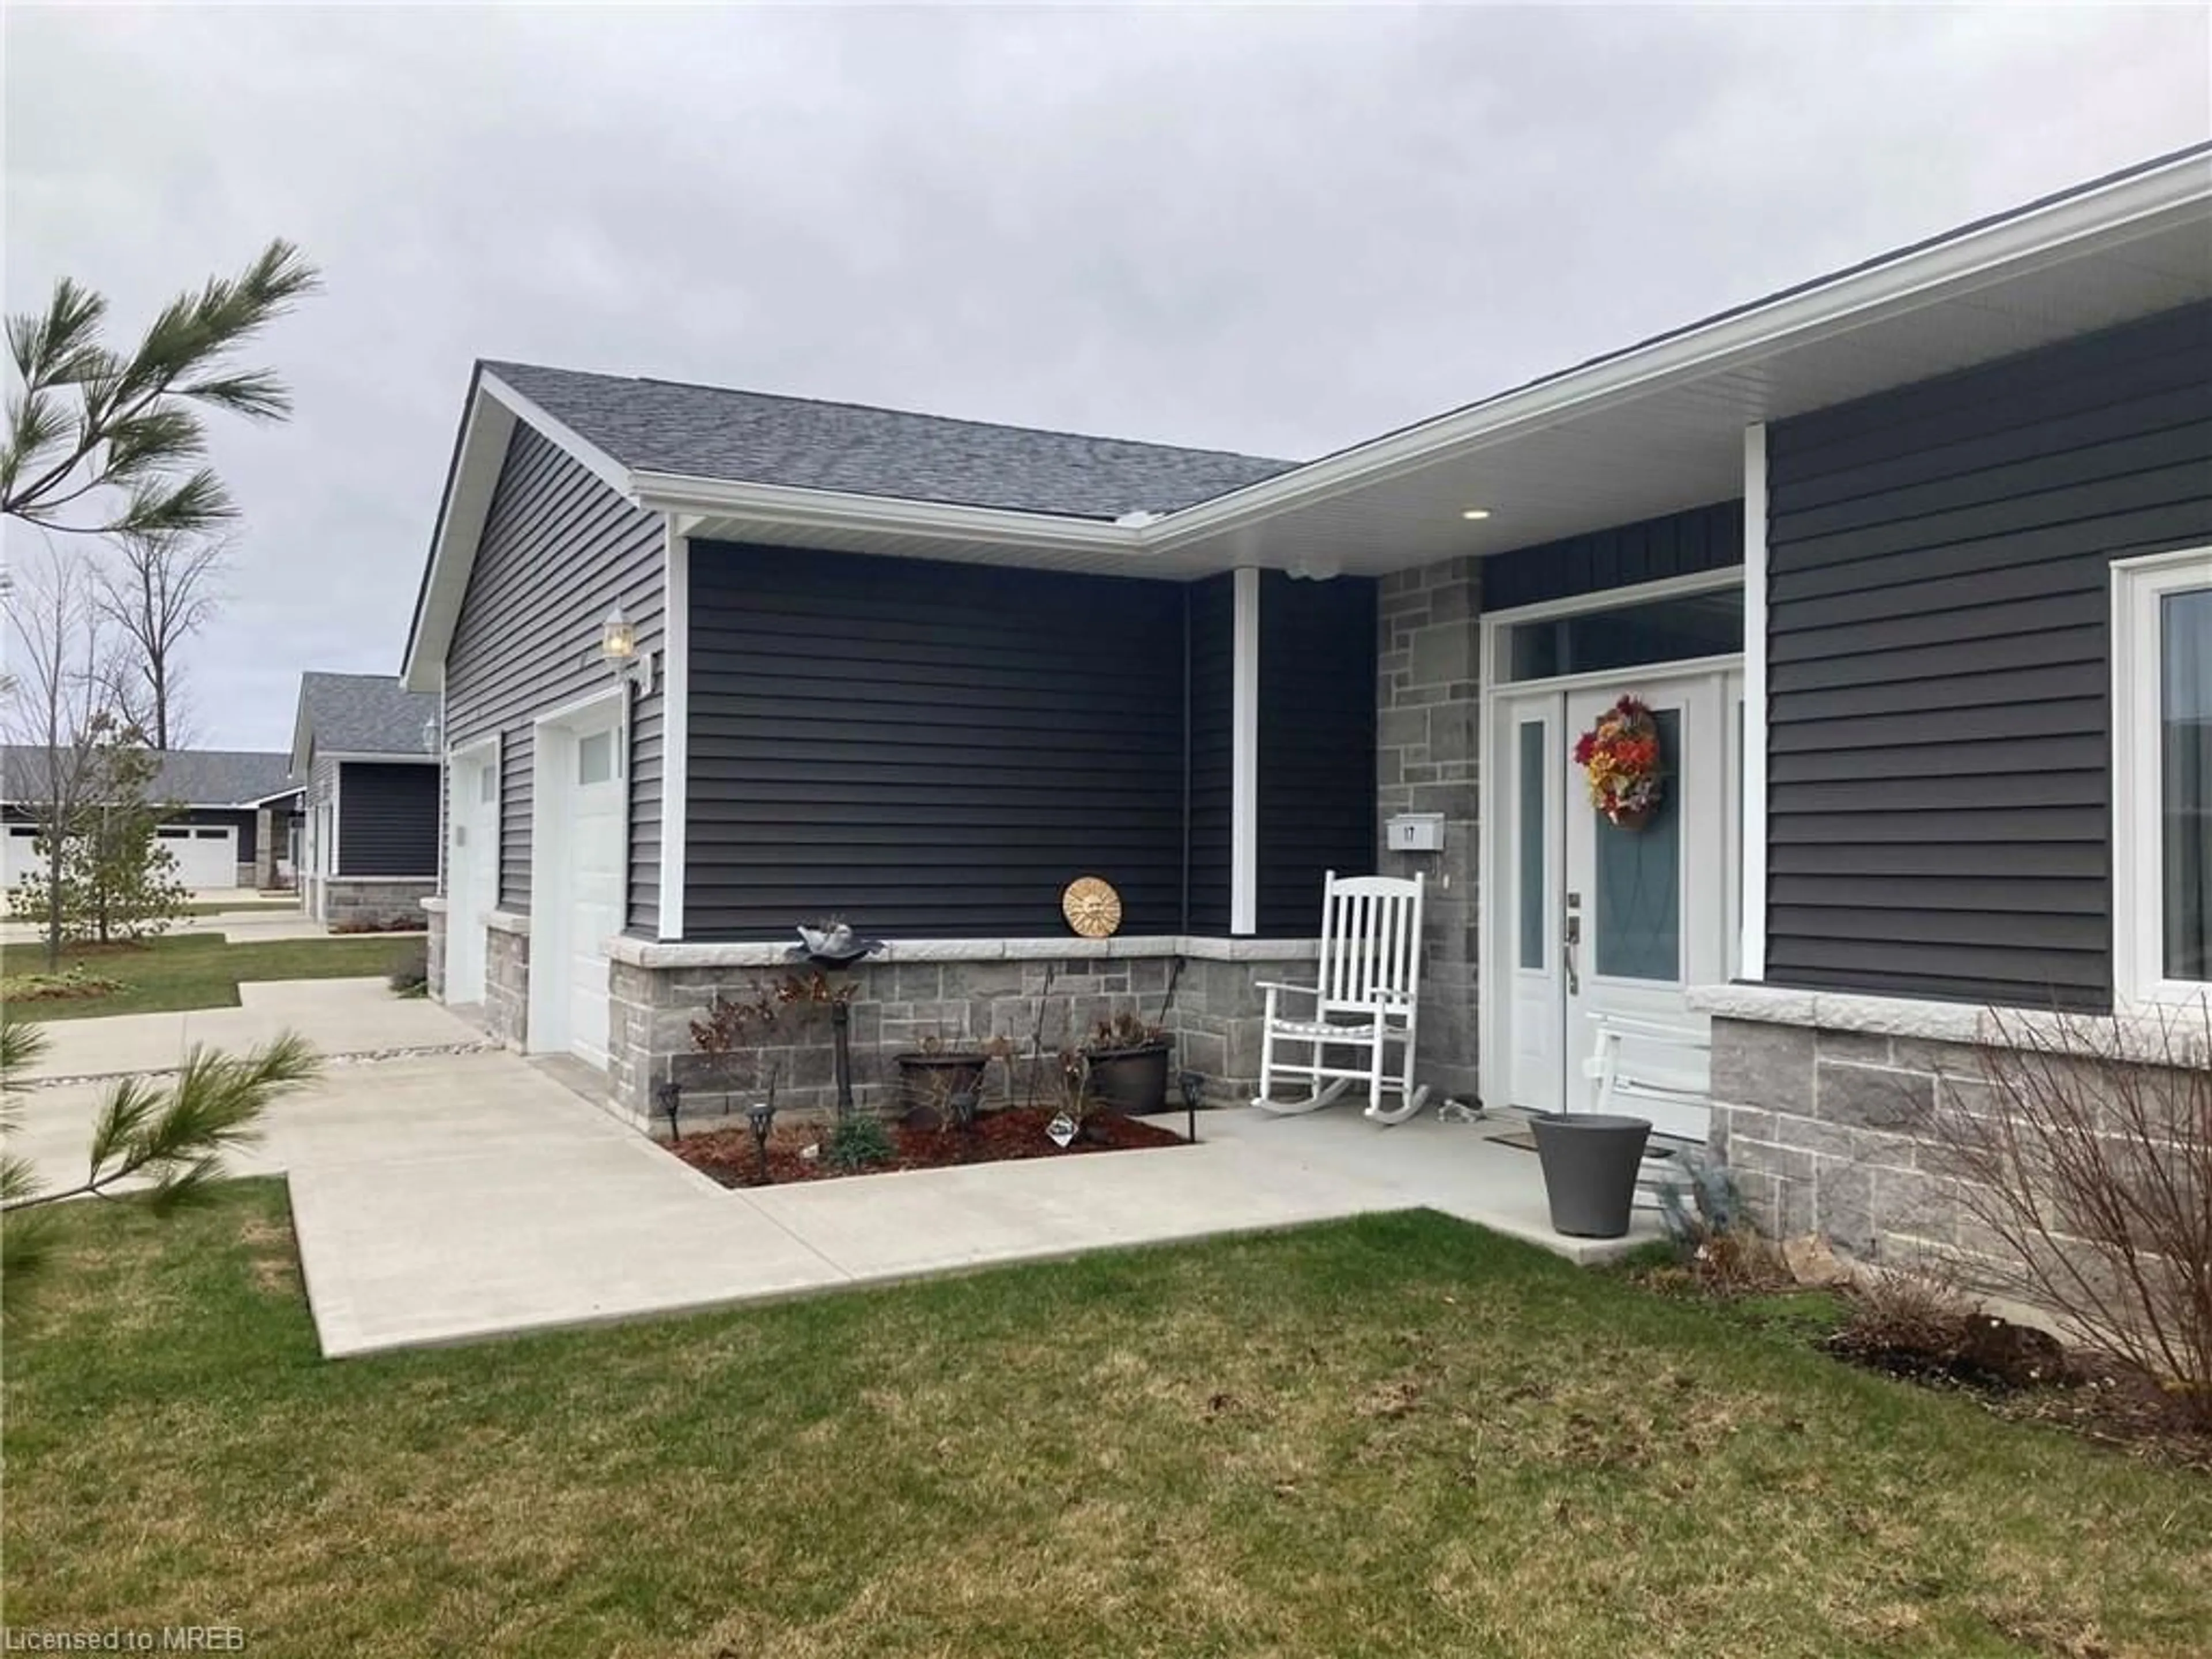 Home with vinyl exterior material for 2380 9th Ave #17, Owen Sound Ontario N4K 3H5